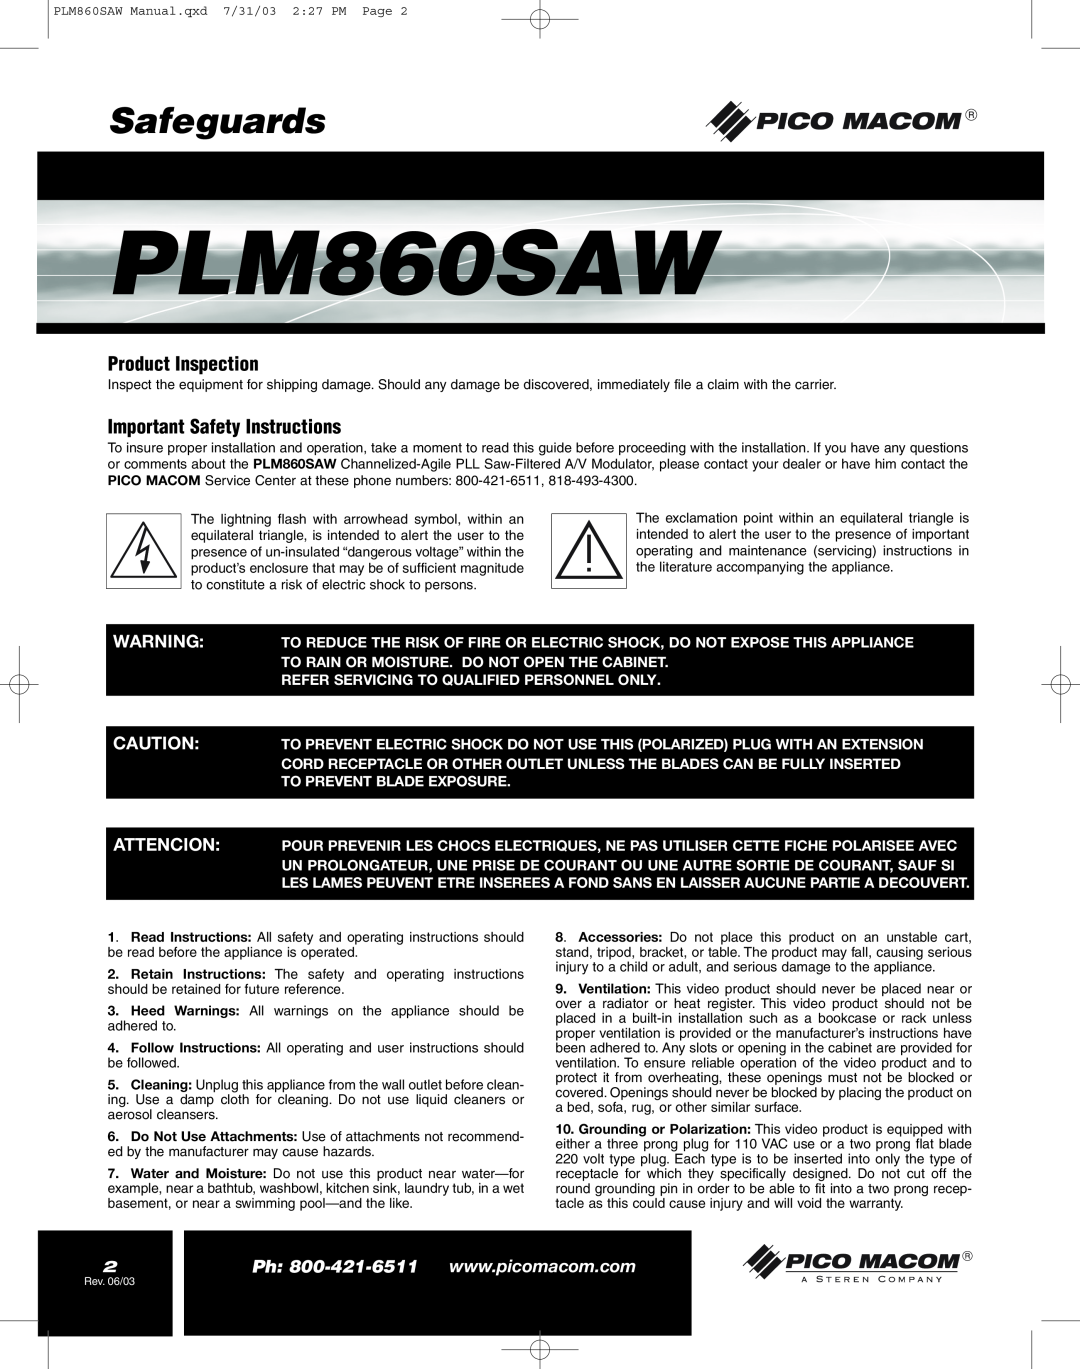 Pico Macom PFAM860SAW operation manual Safeguards, Product Inspection, Important Safety Instructions, PLM860SAW 